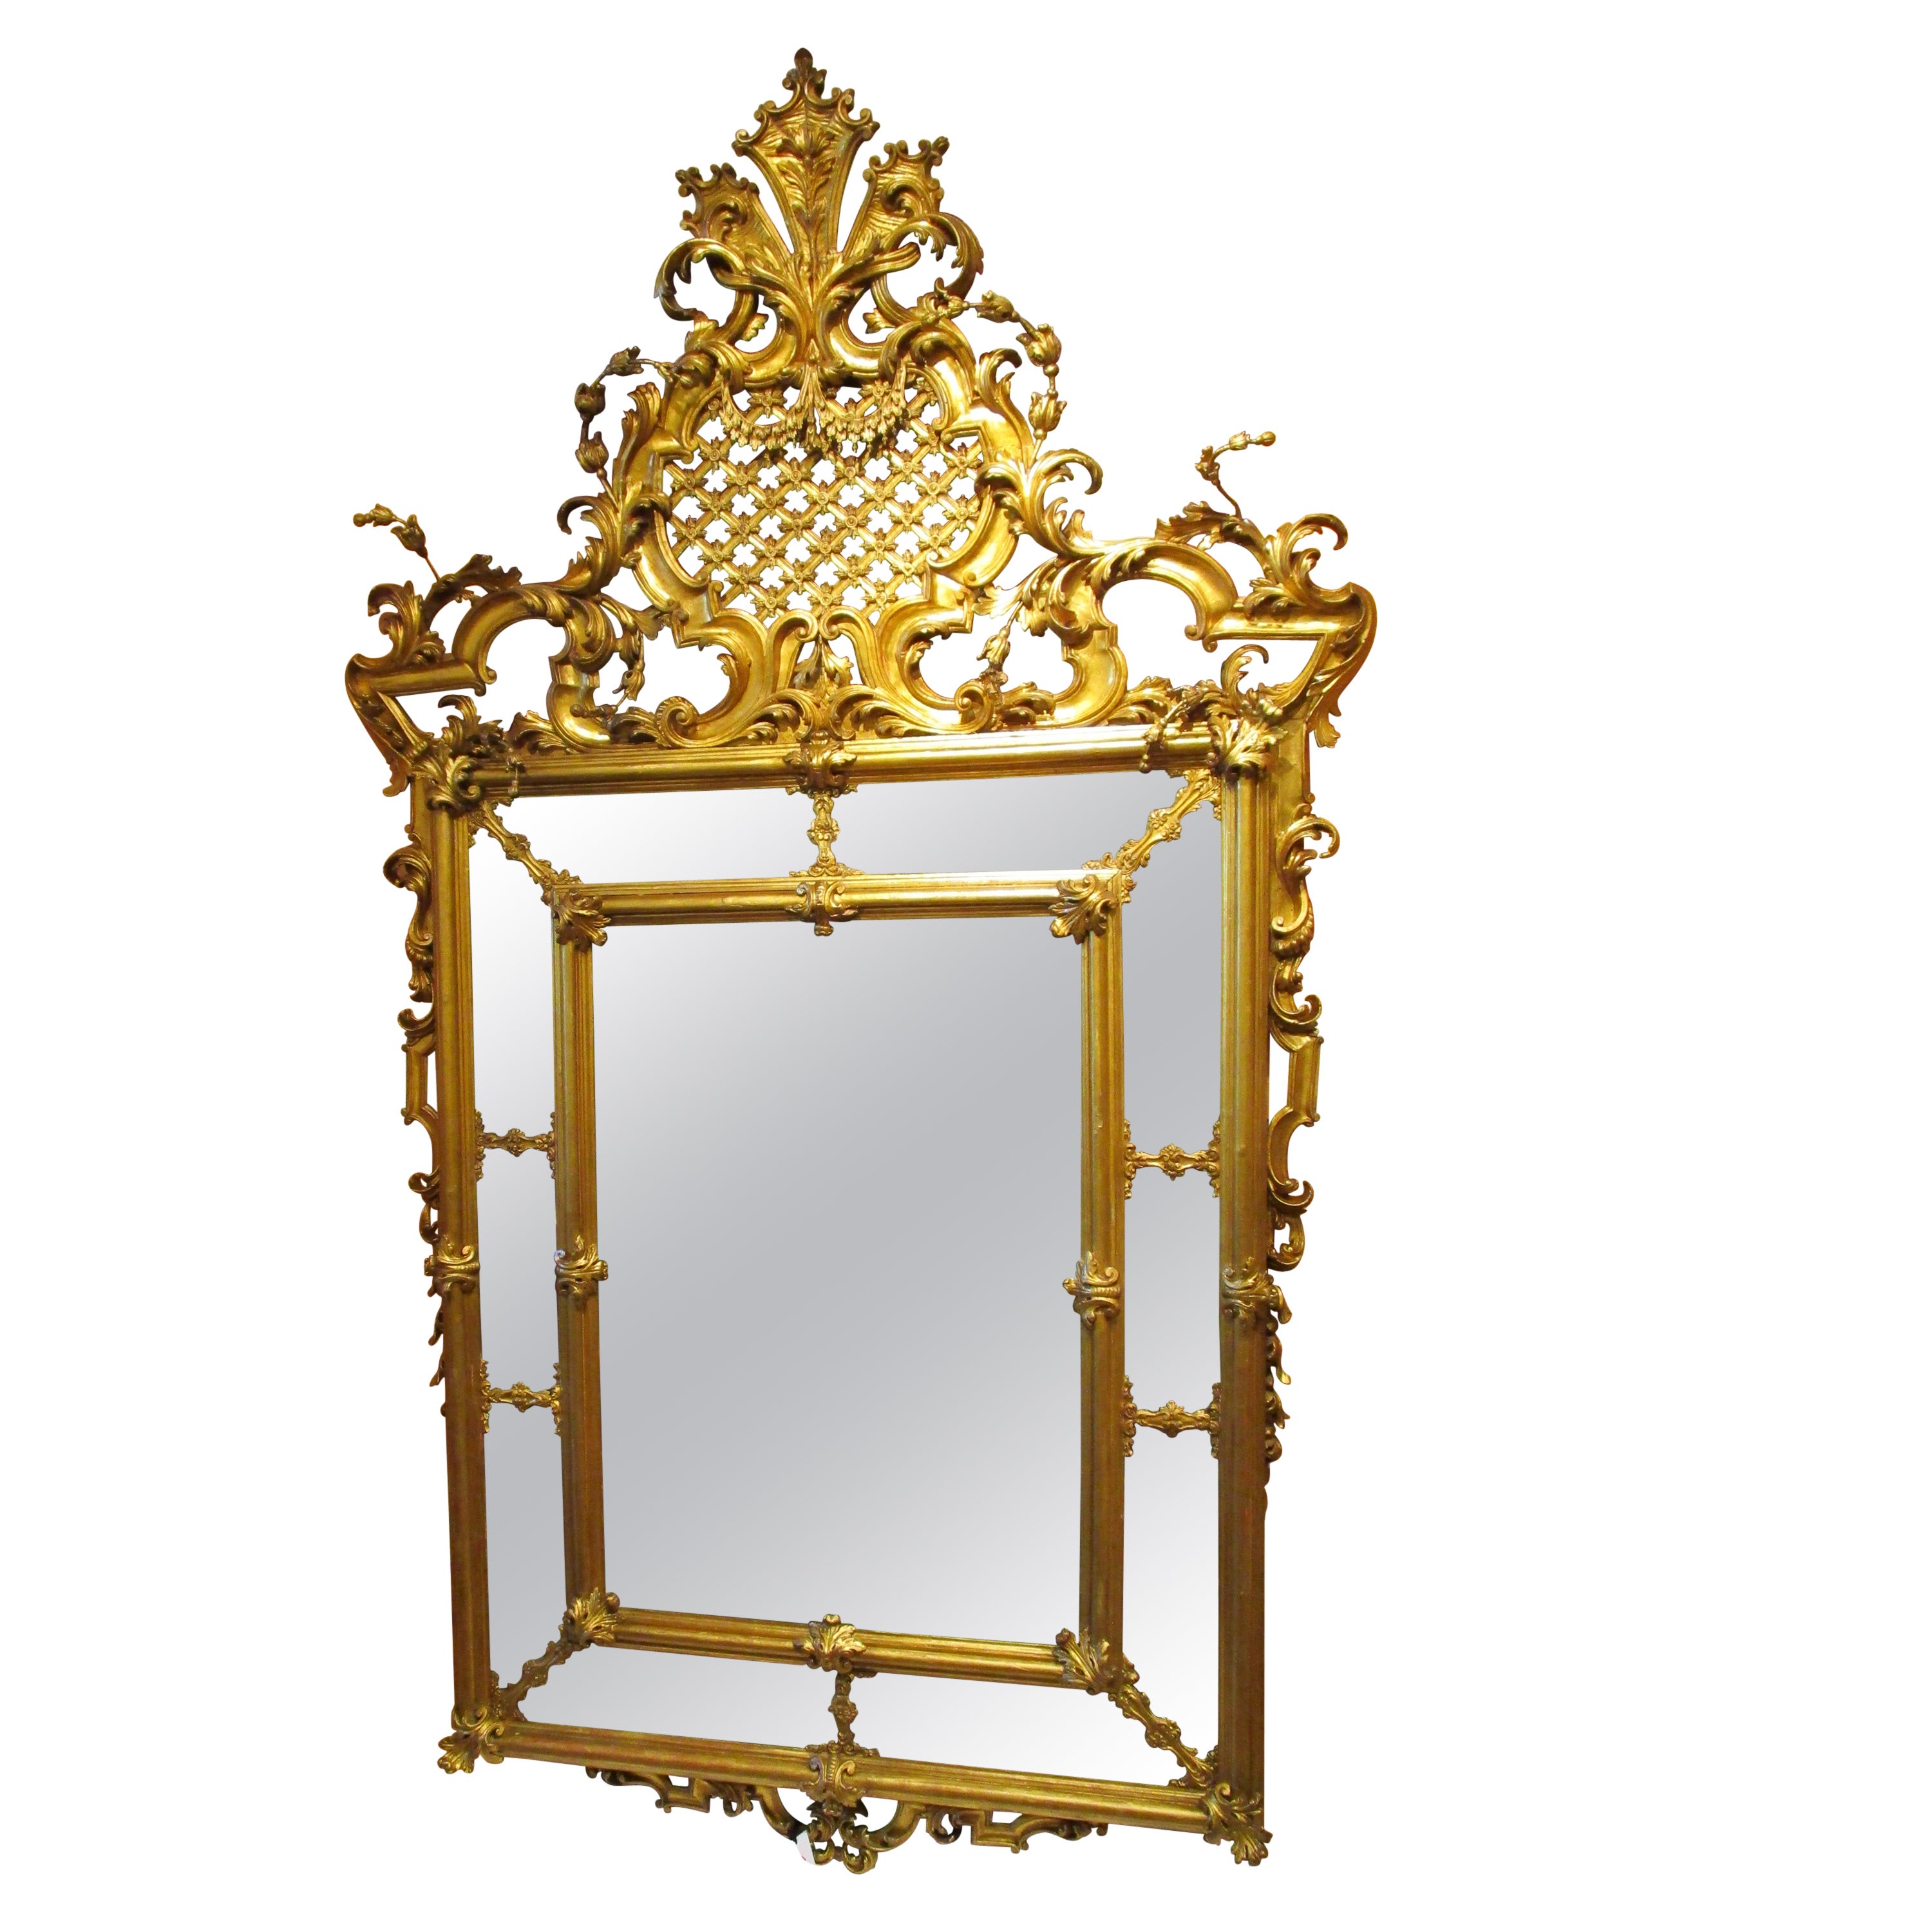 A very fine Palatial 18th century French Louis XV gilt mirror 